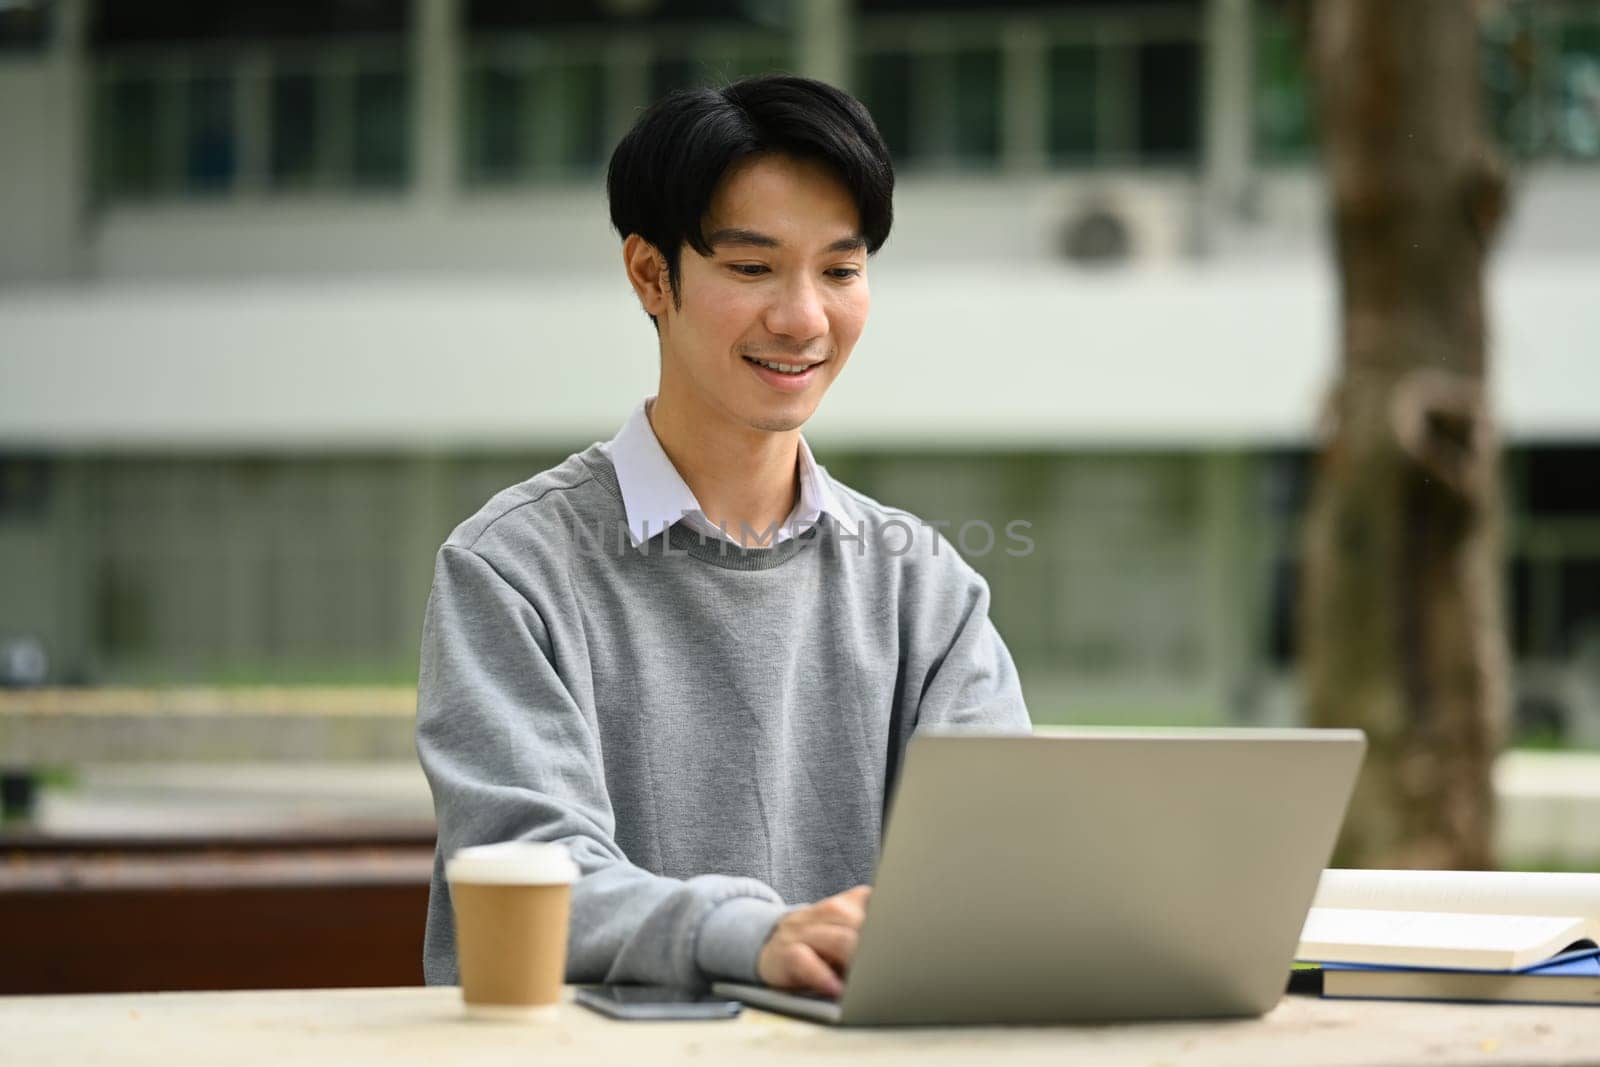 Handsome man using laptop, preparing for exam on table at campus. Youth lifestyle and education concept.